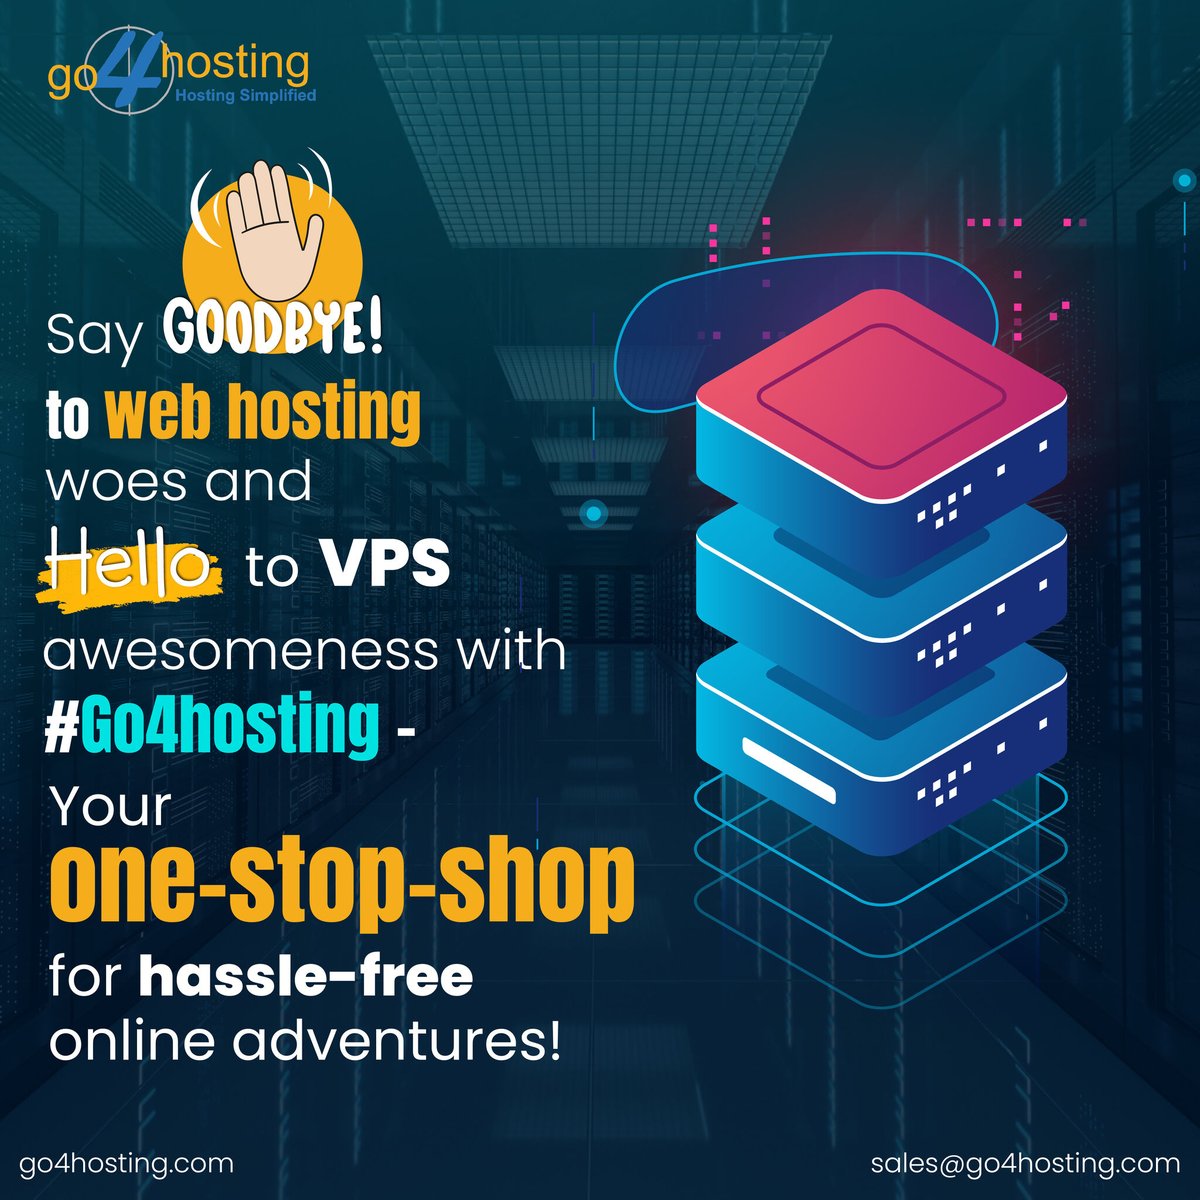 Unleash VPS awesomeness with #Go4hosting -
Bid farewell to web hosting worries and embark on hassle-free online adventures!

#VPSHosting #Go4hosting #WebHosting #OnlineAdventures #VPSAwesomeness #HassleFreeHosting #SayGoodbyeToWoes
#go4hosting